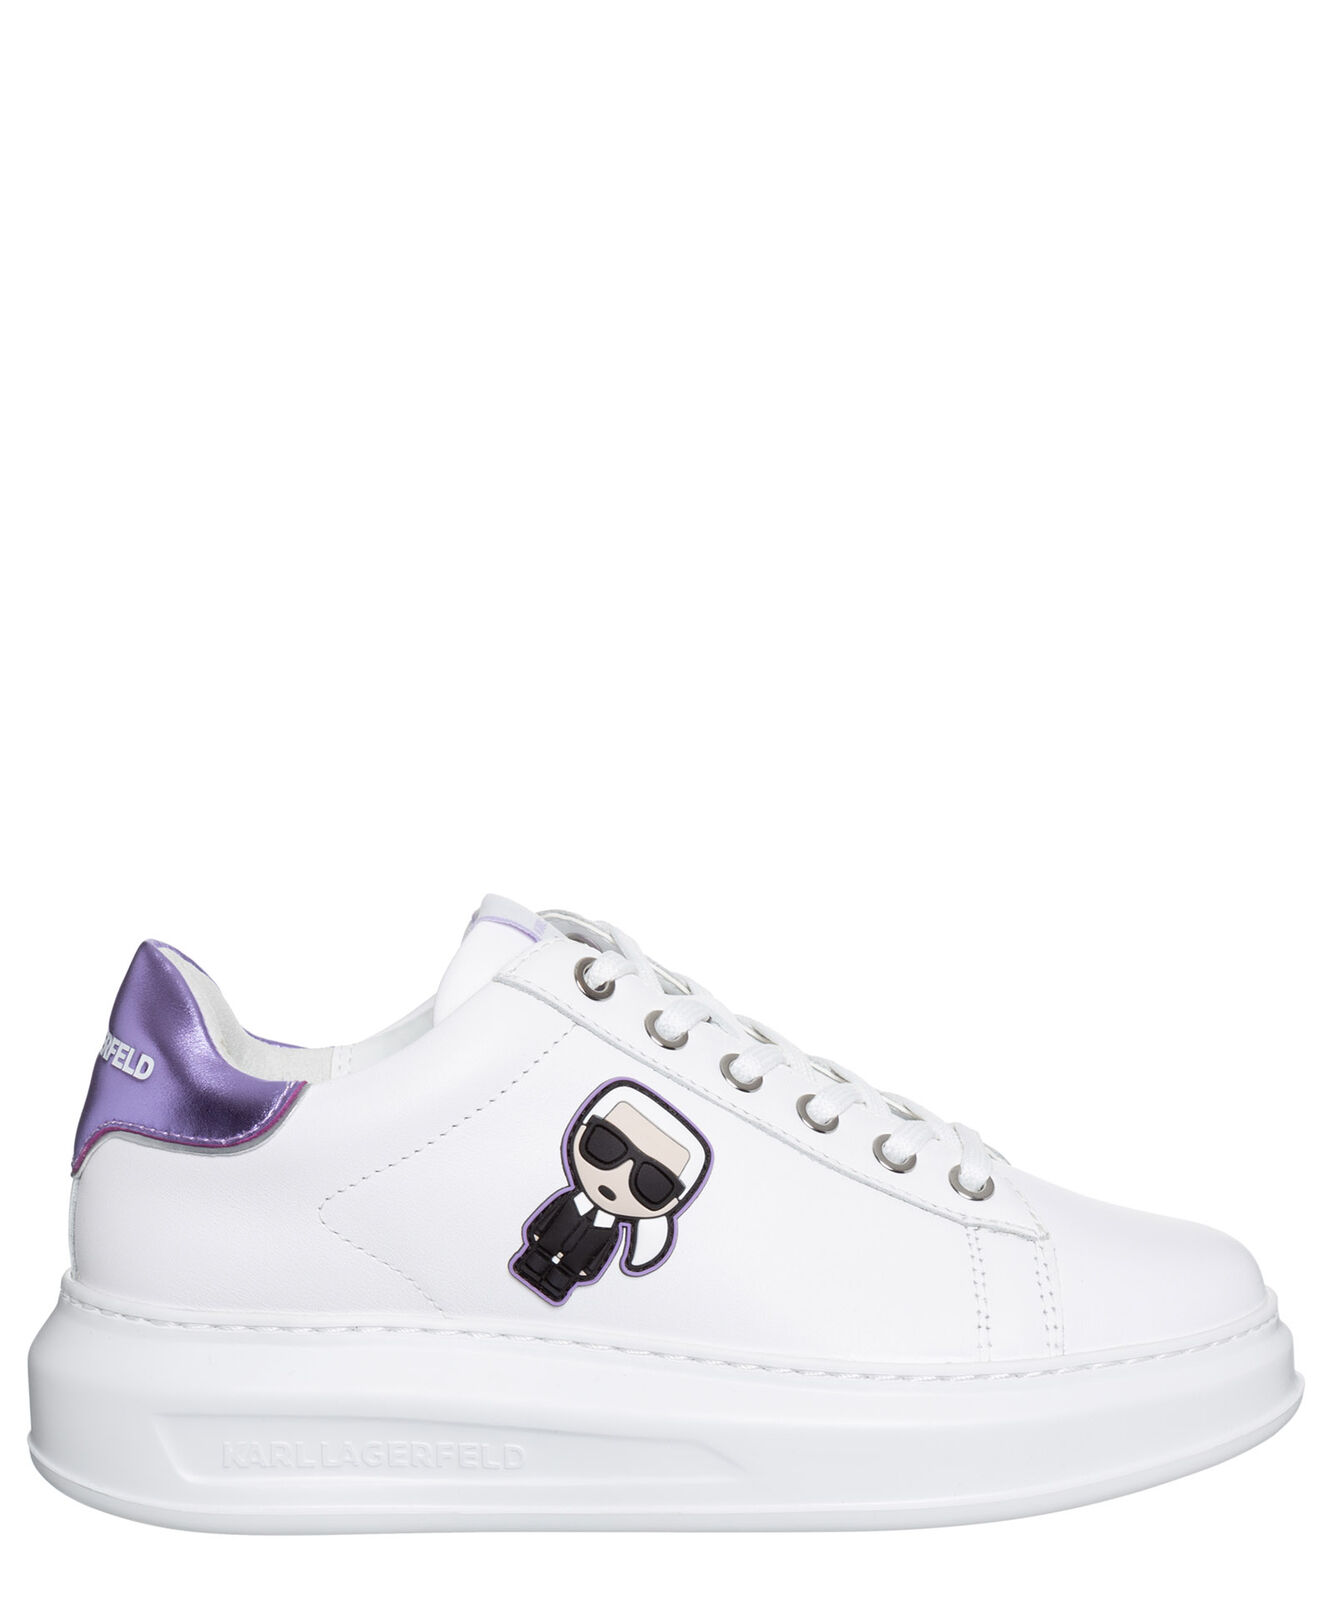 Pre-owned Karl Lagerfeld Sneakers Women Kl62530 01v White - Lilac Leather Logo Detail